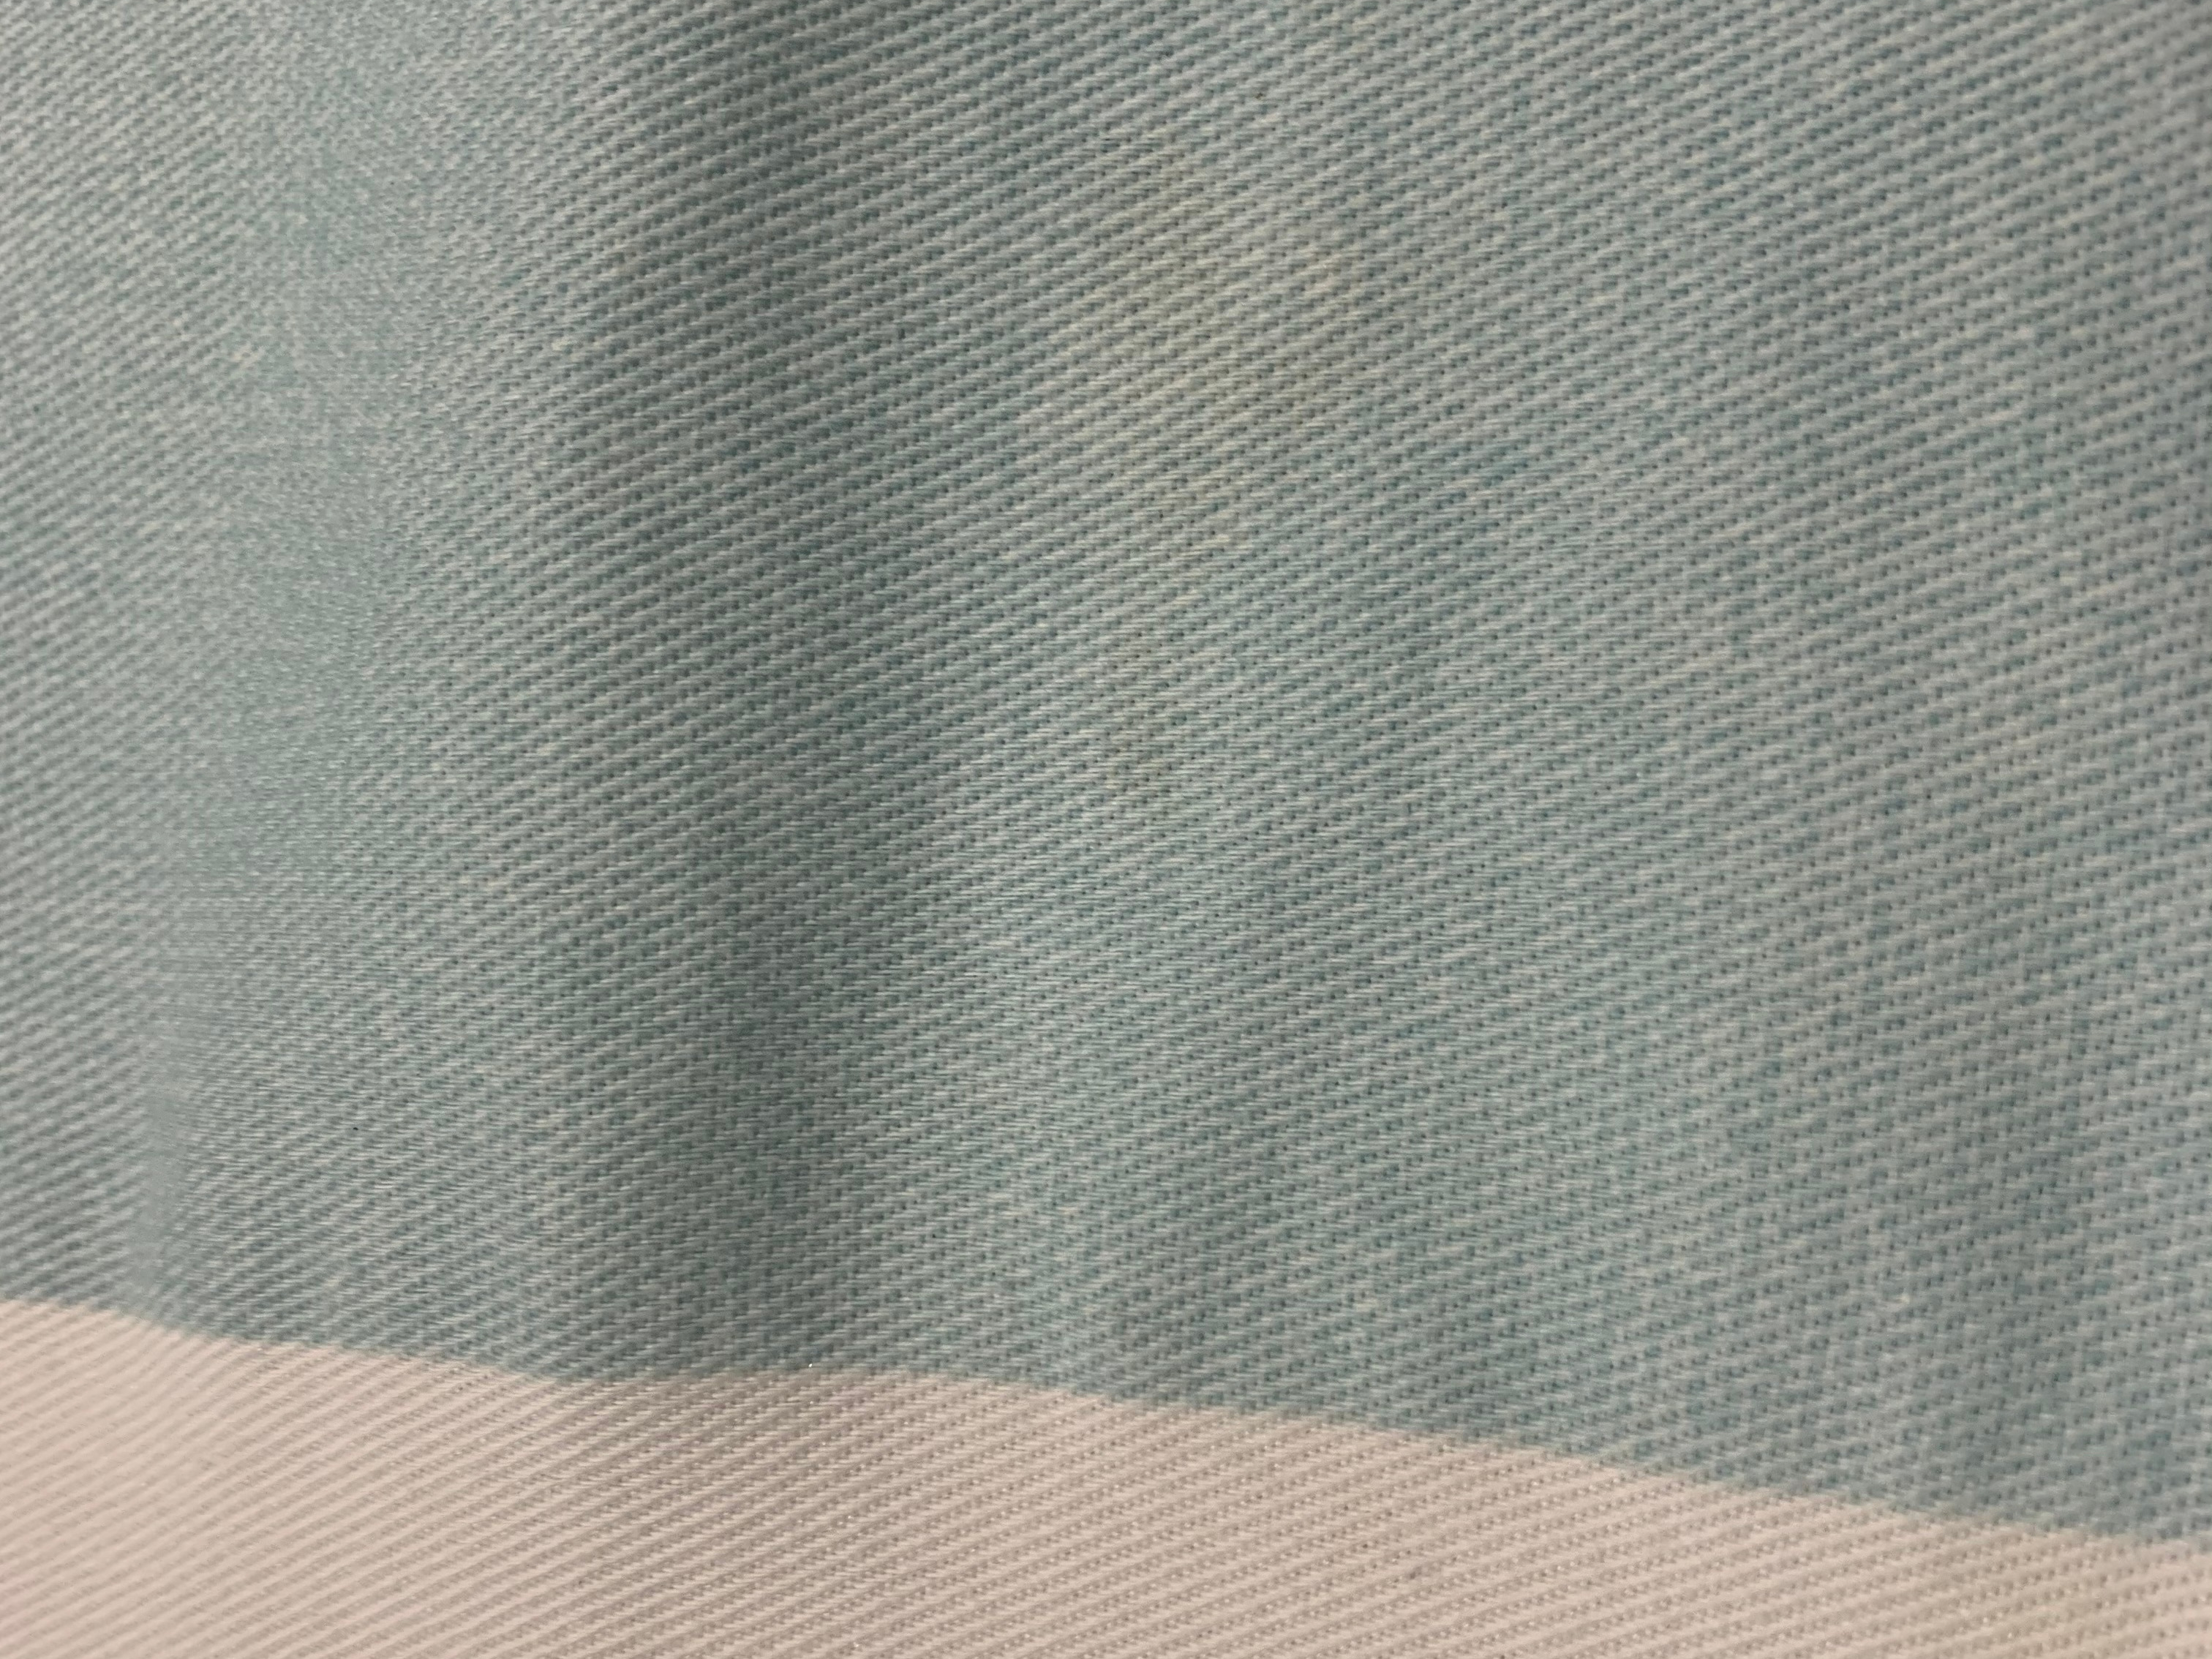 Image of blue and white tablecloth with no stains